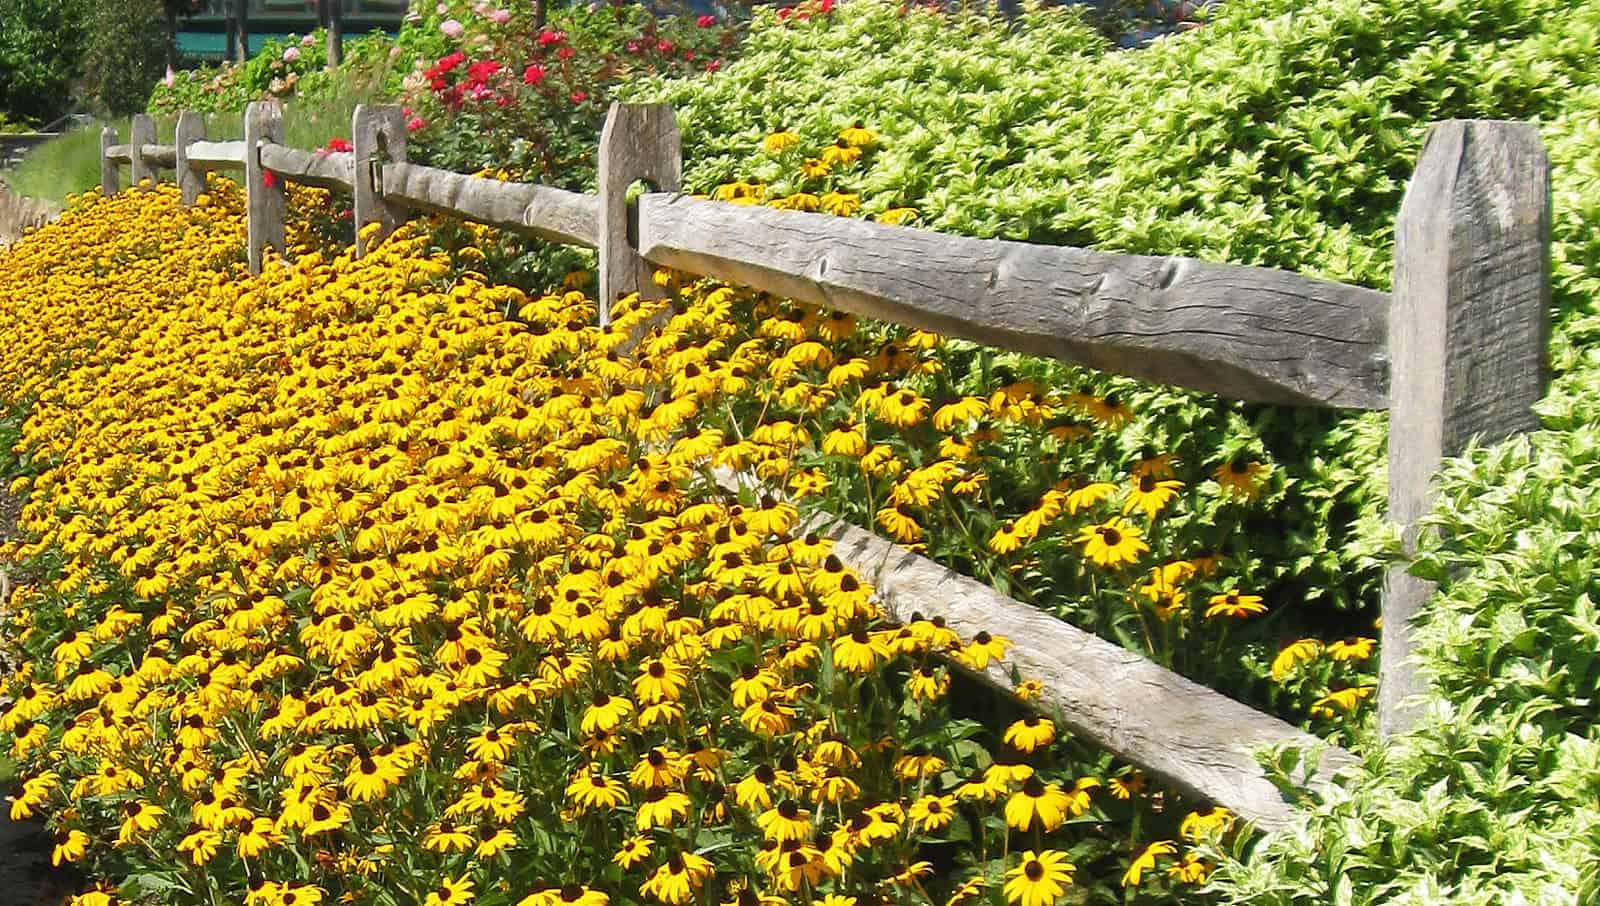 A wooden fence lines a vibrant garden filled with yellow flowers and assorted green foliage under bright sunlight.